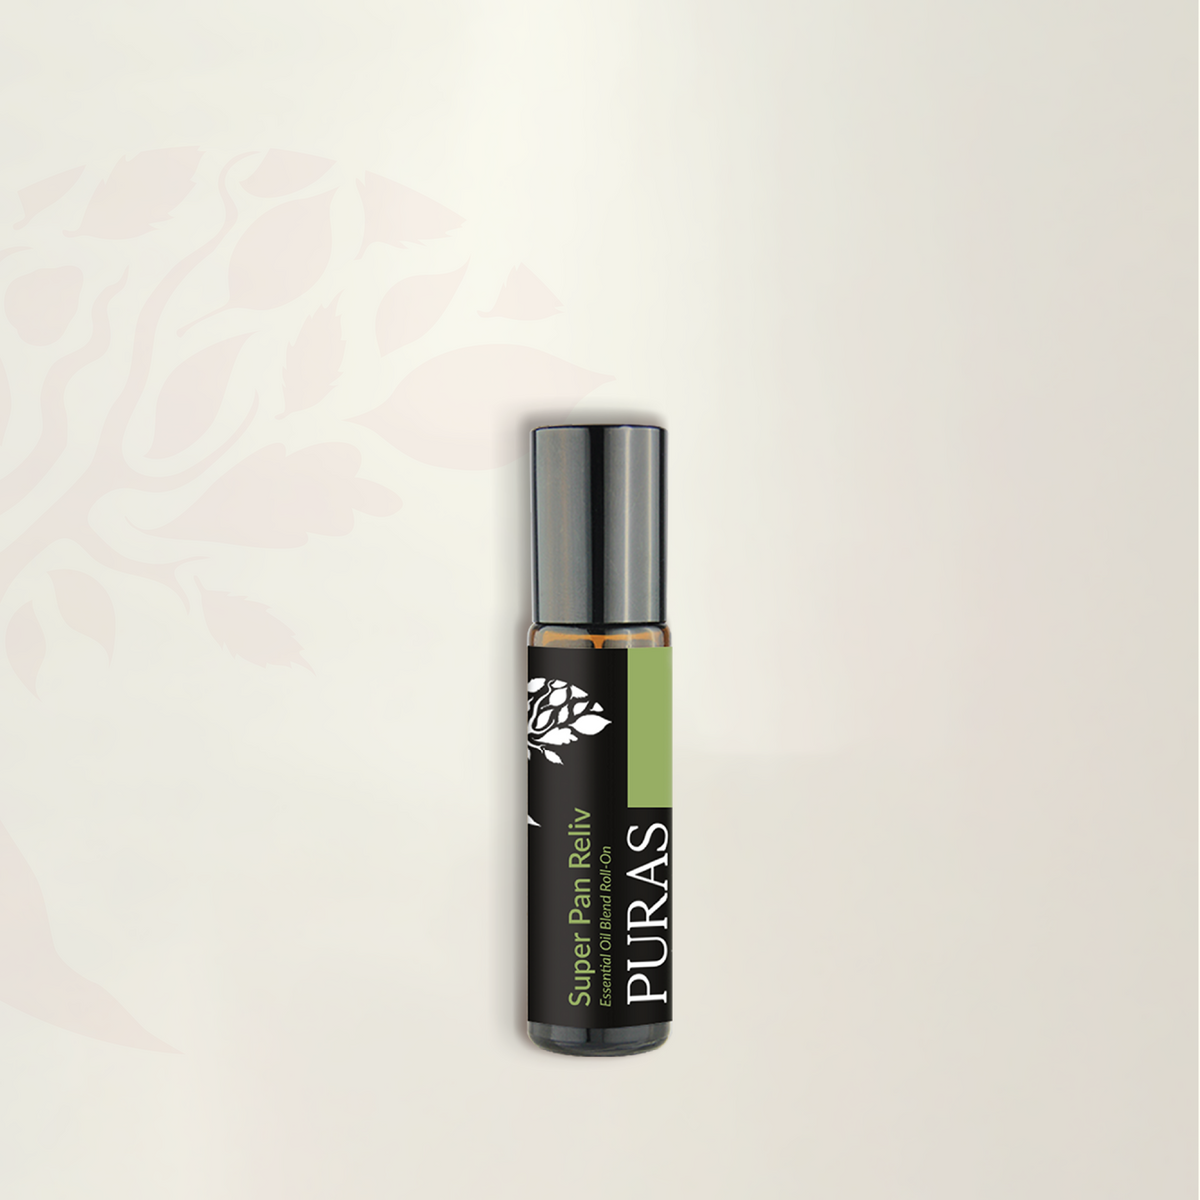 Super Pan Reliv Essential Oil Blend (Roll-On) 10ml